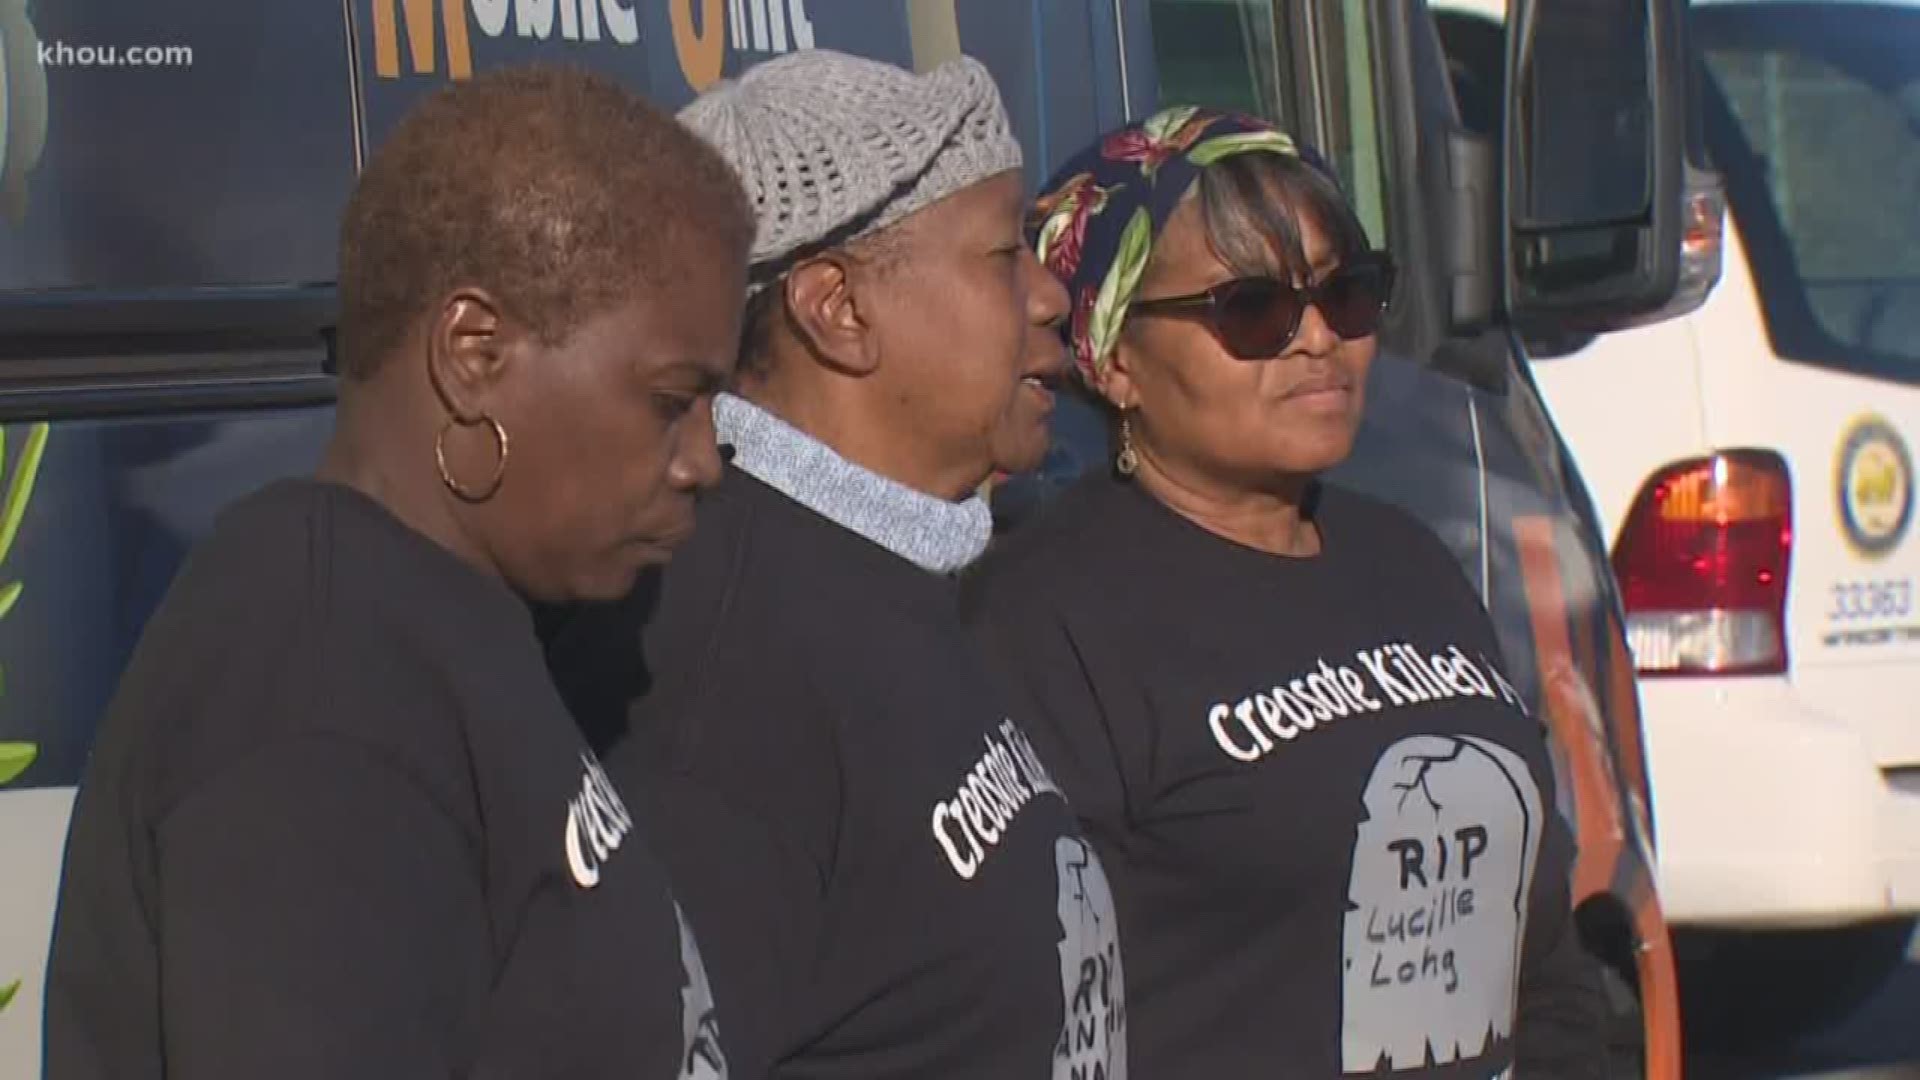 Fifth Ward residents are demanding to find the cause of what they believe to be a so-called “cancer cluster” in their community.